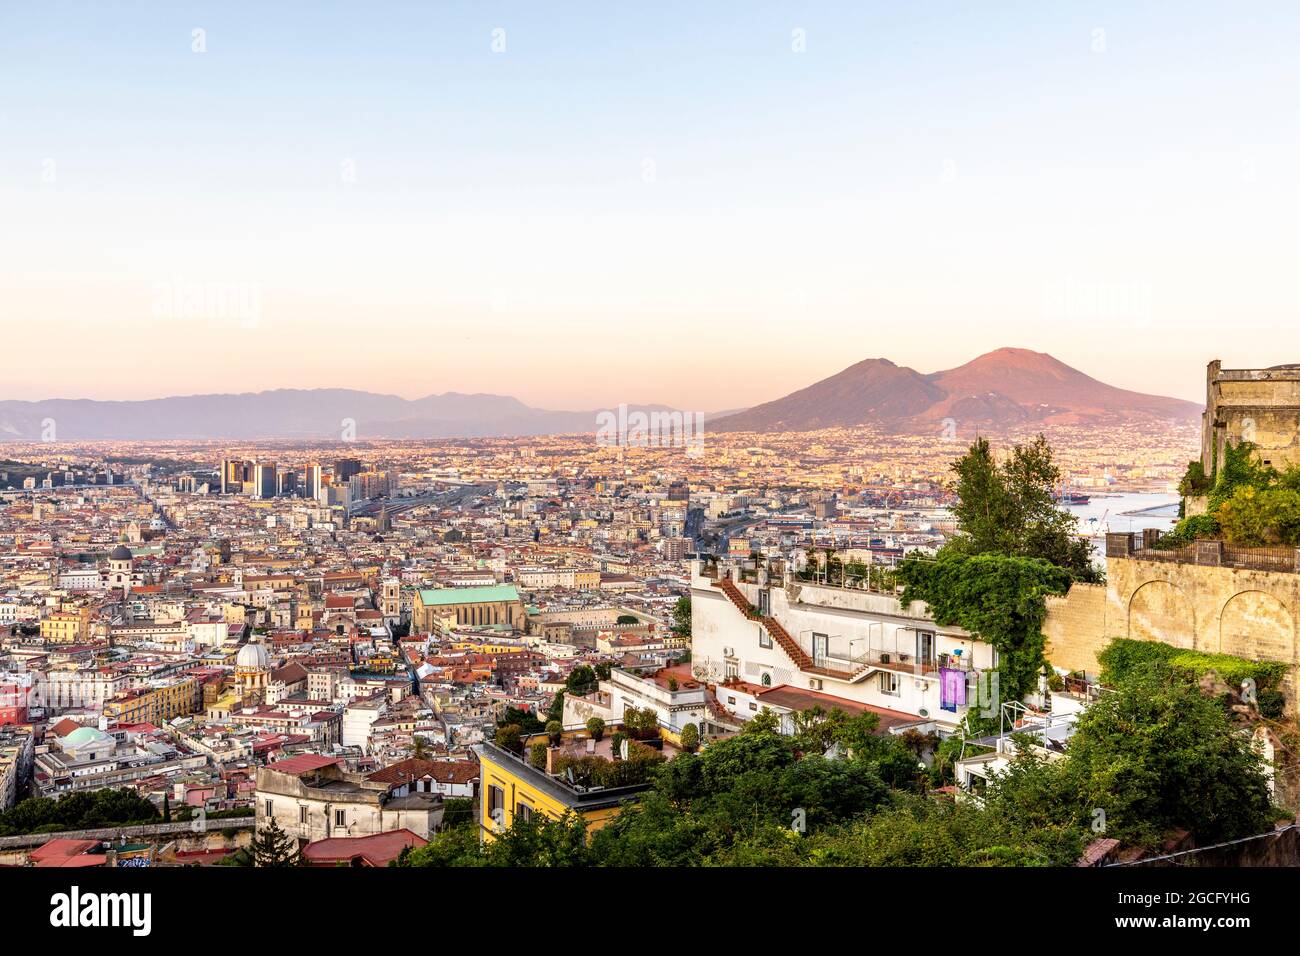 Napoli, Italy - July 11, 2021: Bay of Napoli and Vesuvius volcano in background at sunset in a summer day in Italy, Campania Stock Photo